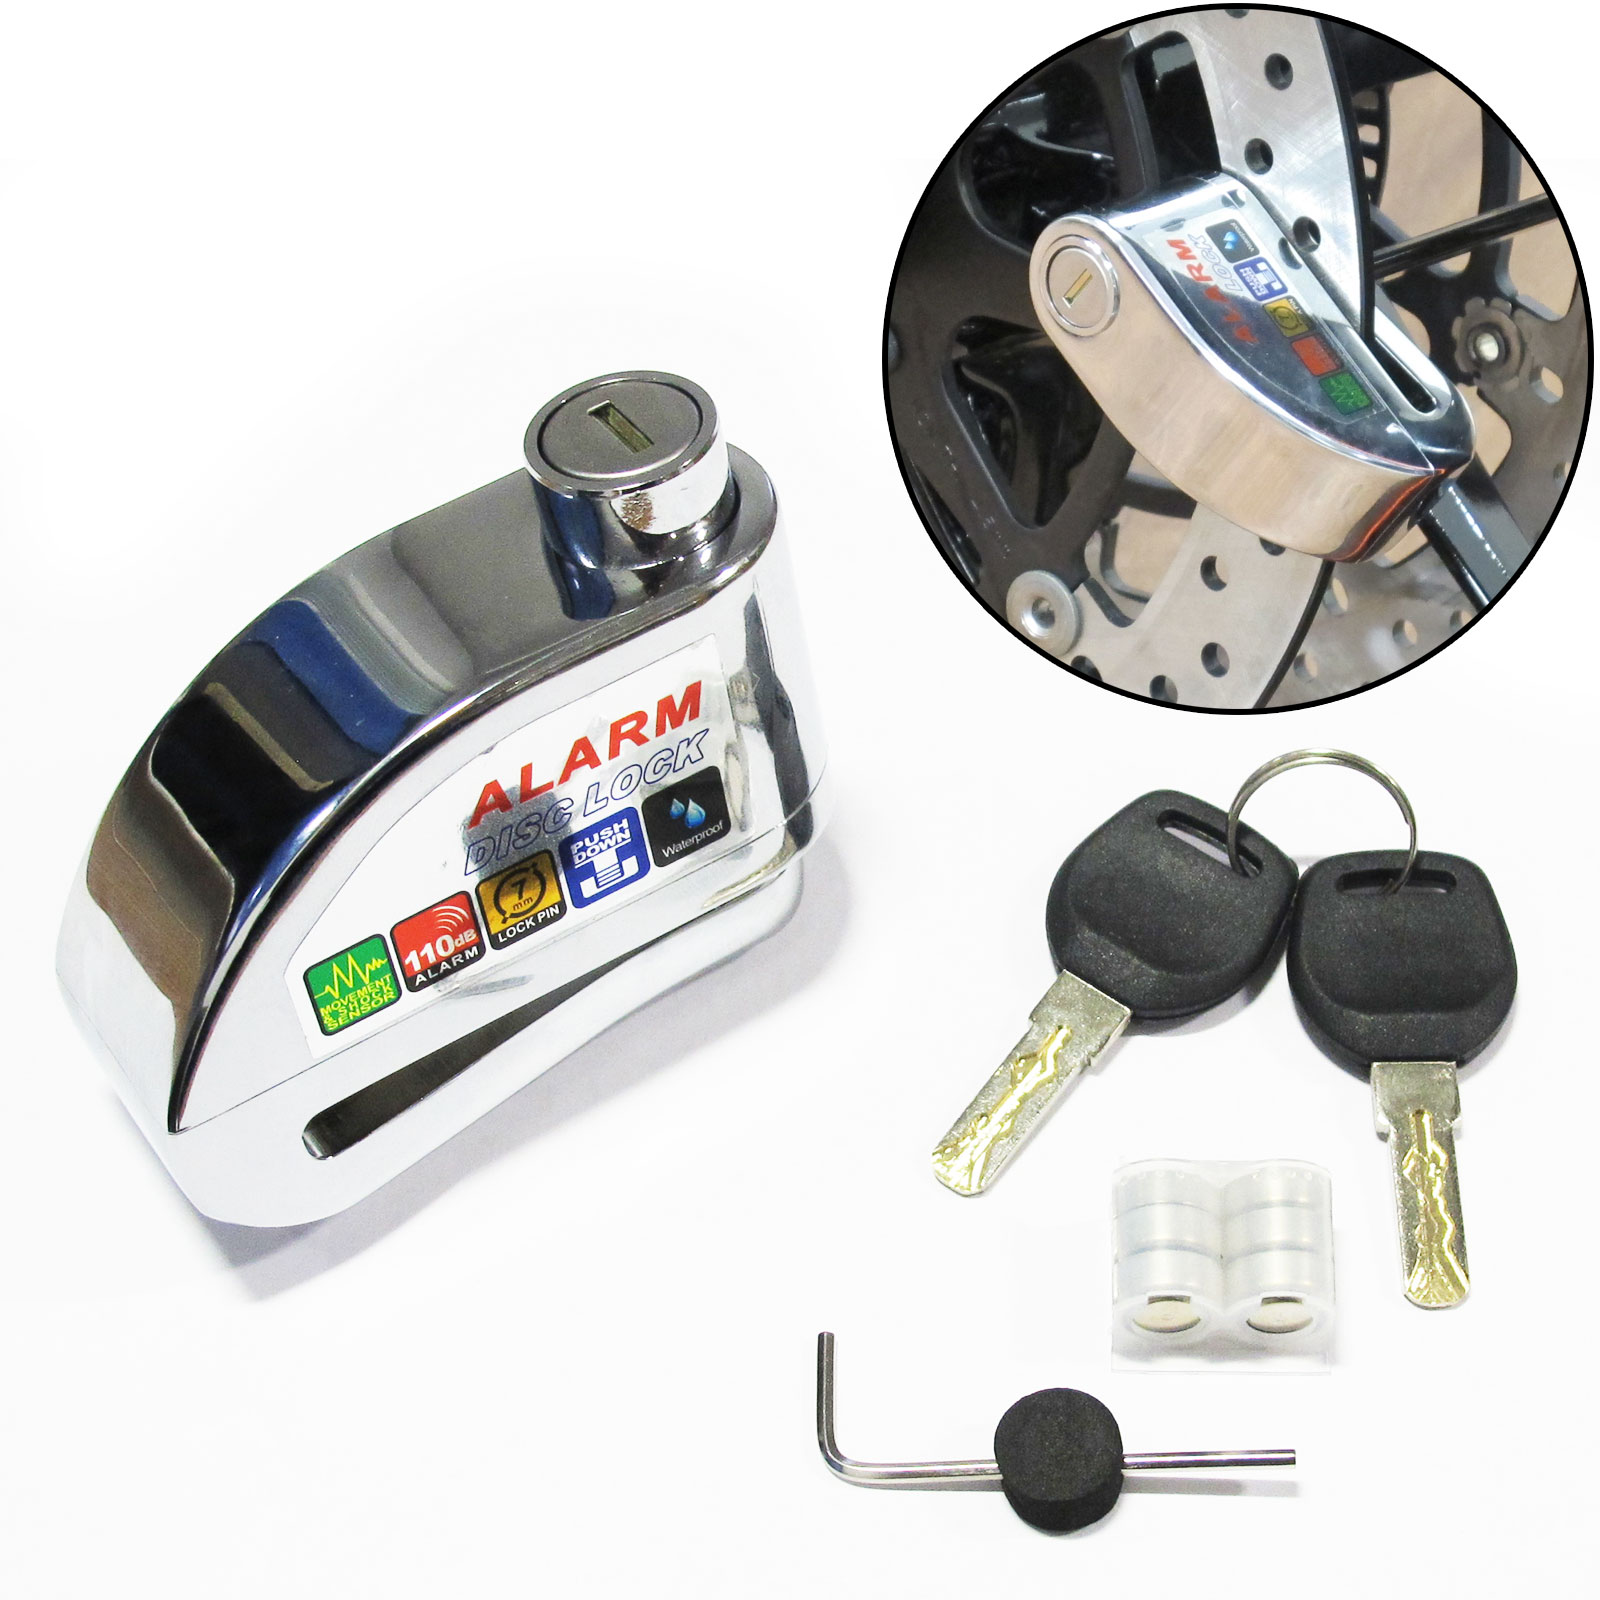 SNC Alarm Disc Lock, FREE UK DELIVERY, Flexible Ways To Pay